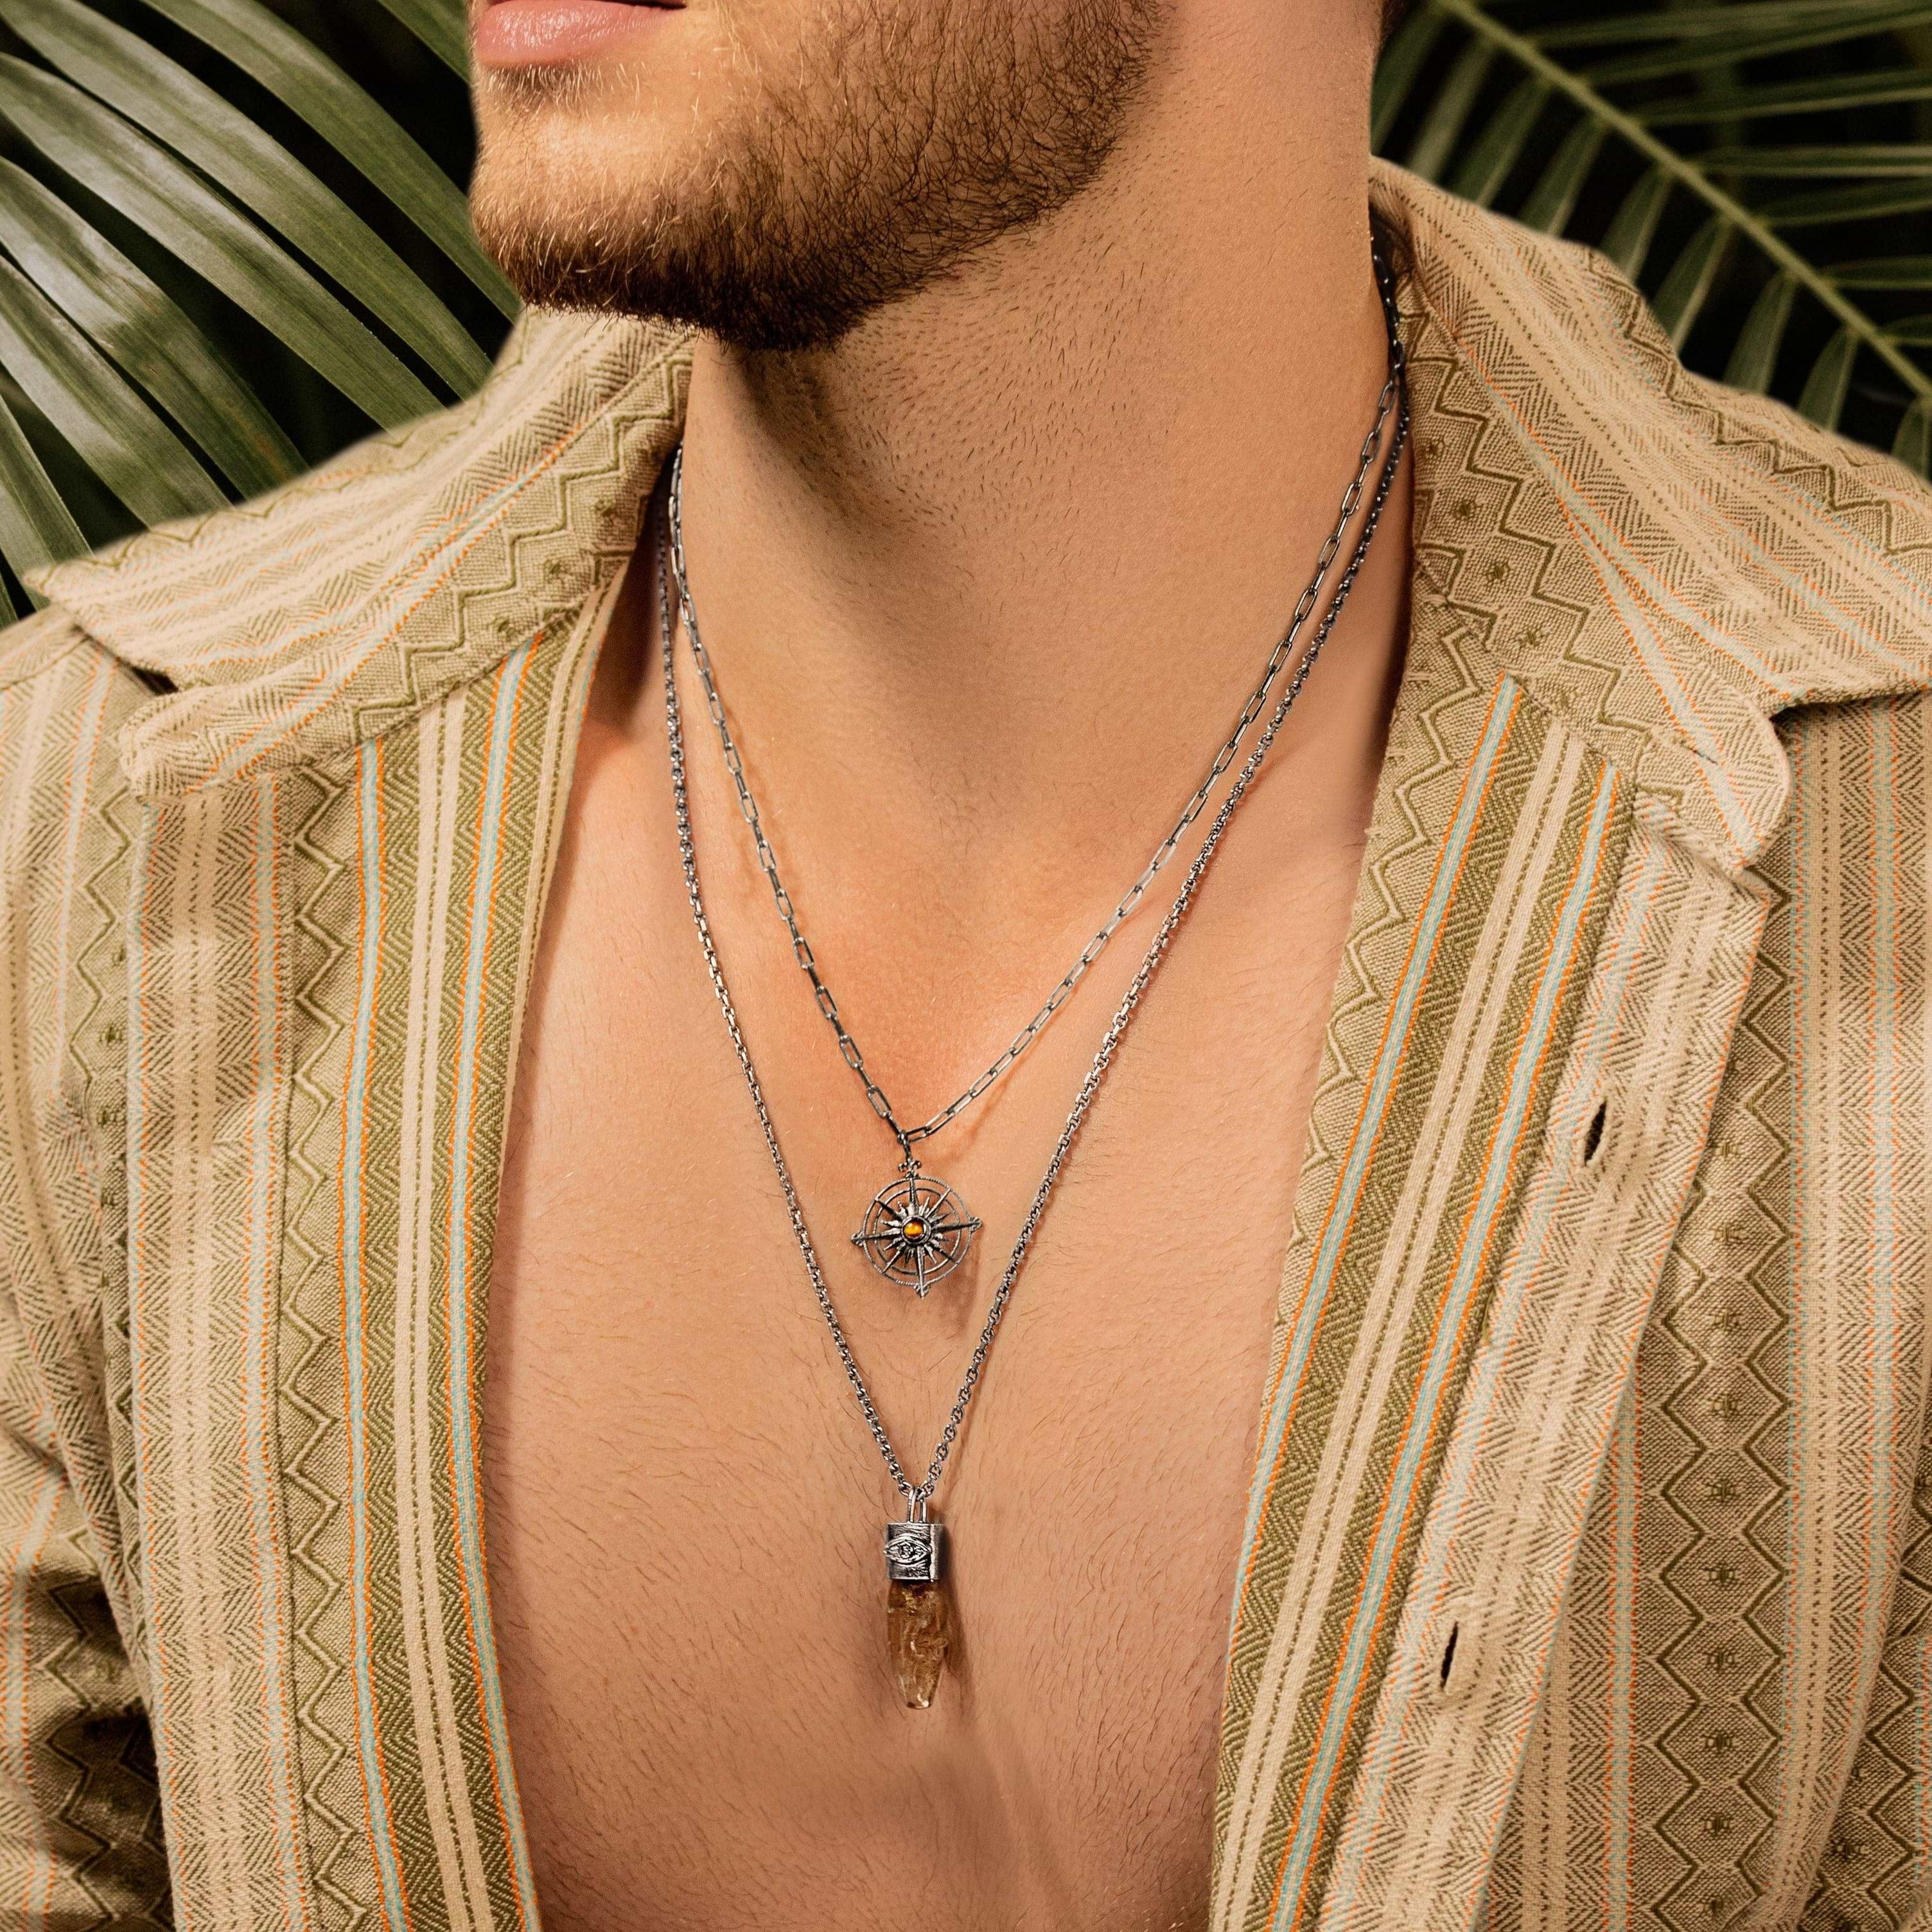 Karma and Luck  Necklaces - Mens  -  Paths of Courage - Tiger's Eye Compass Charm Necklace